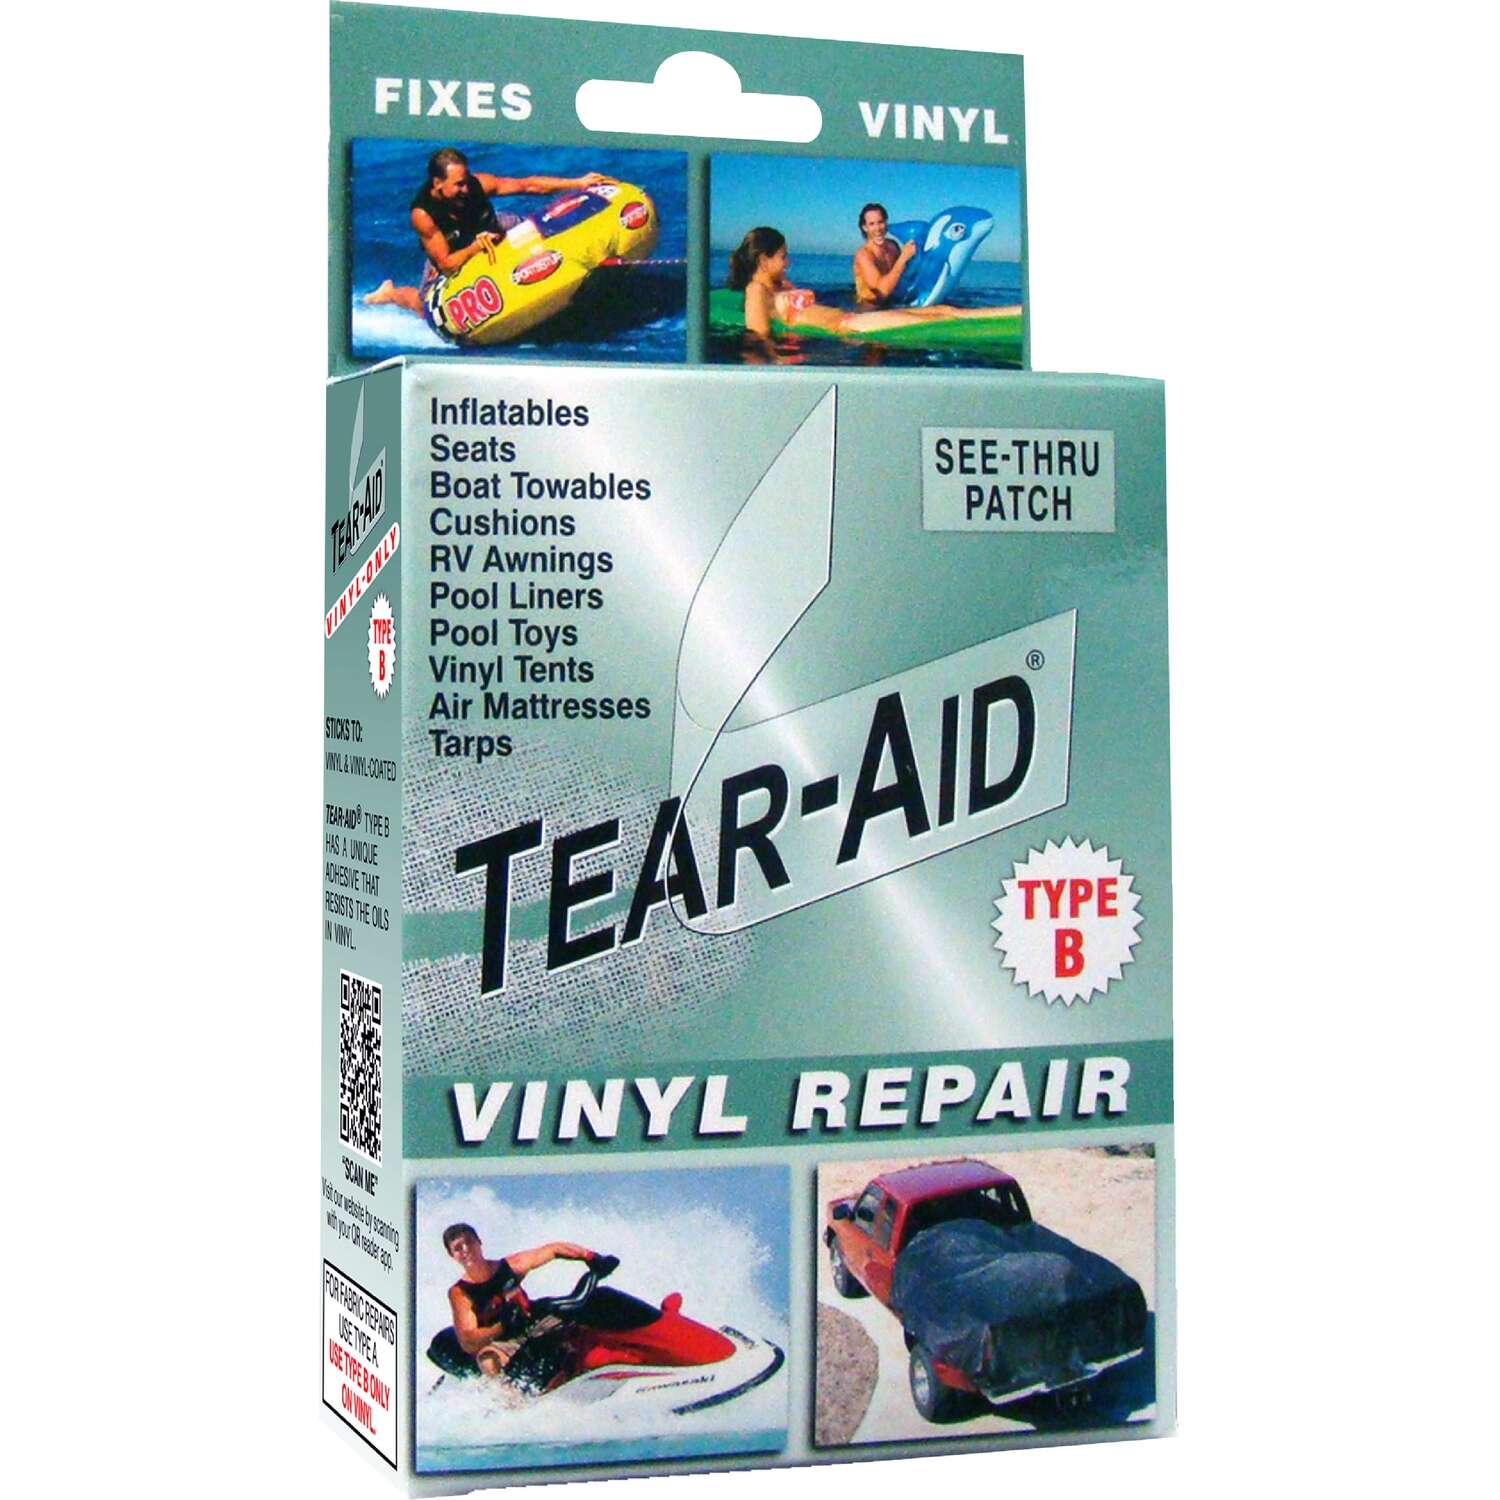 WATER SLIDE REPAIR ** EXTREME BOND ** 1FT TEAR-AID PATCH TAPE A 3" x 12" 